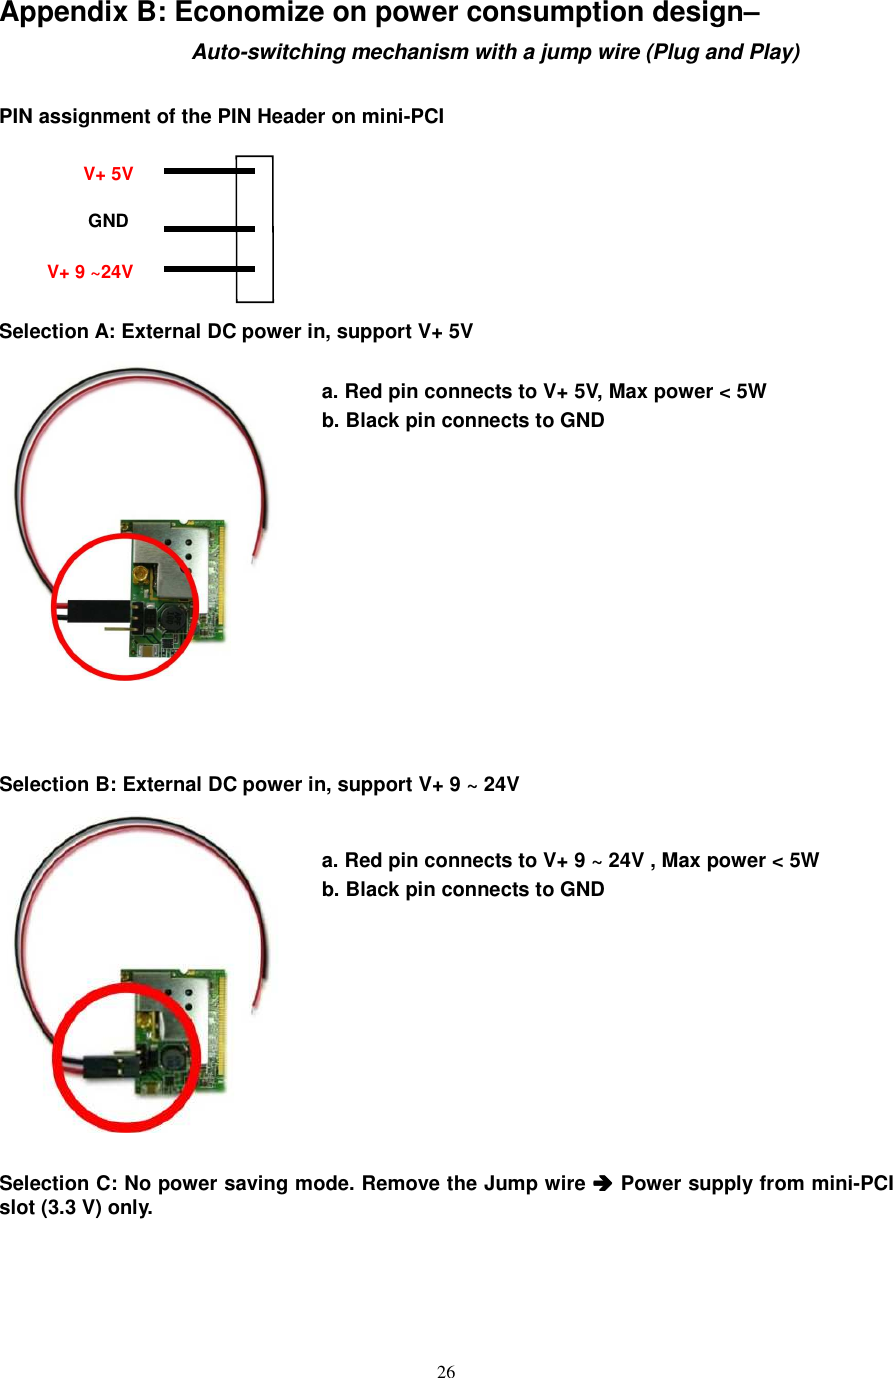  26 Appendix B: Economize on power consumption design–                                                          Auto-switching mechanism with a jump wire (Plug and Play)  PIN assignment of the PIN Header on mini-PCI       Selection A: External DC power in, support V+ 5V                                                          a. Red pin connects to V+ 5V, Max power &lt; 5W b. Black pin connects to GND             Selection B: External DC power in, support V+ 9 ~ 24V           a. Red pin connects to V+ 9 ~ 24V , Max power &lt; 5W b. Black pin connects to GND          Selection C: No power saving mode. Remove the Jump wire  Power supply from mini-PCI slot (3.3 V) only. V+ 5V GND V+ 9 ~24V 